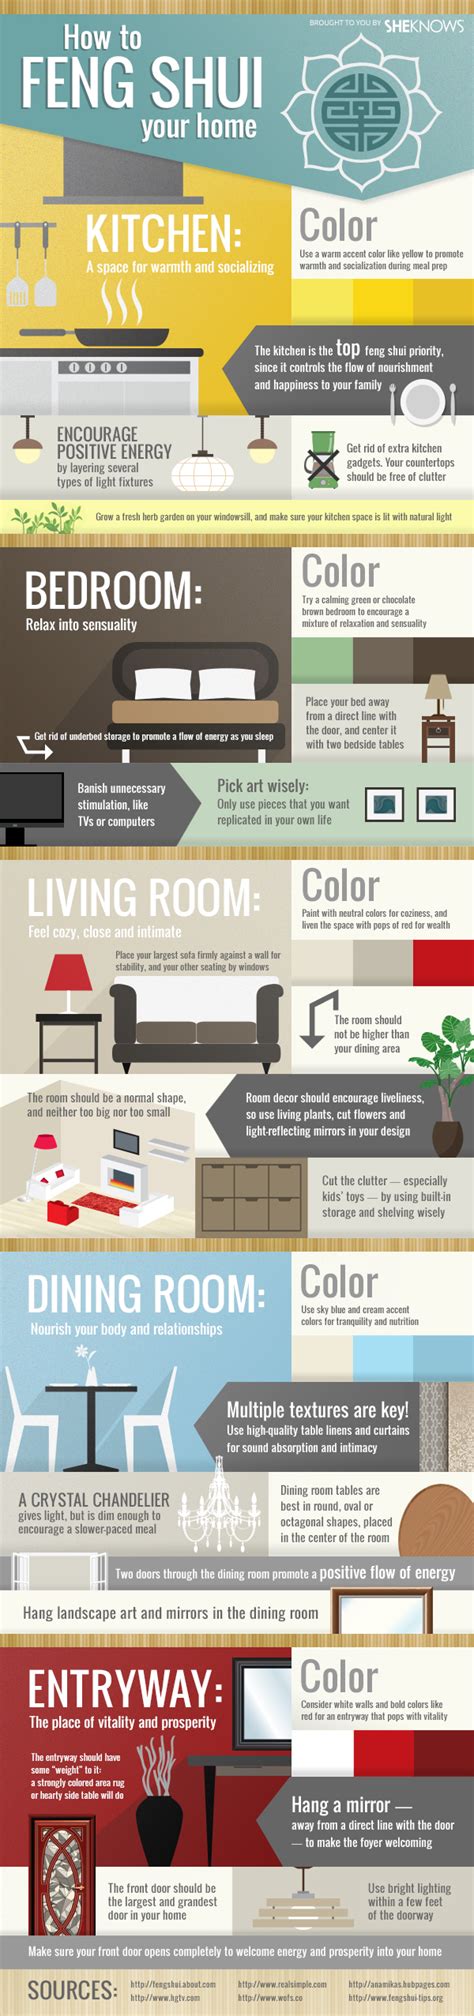 How To Feng Shui Your Home A Room By Room Guide